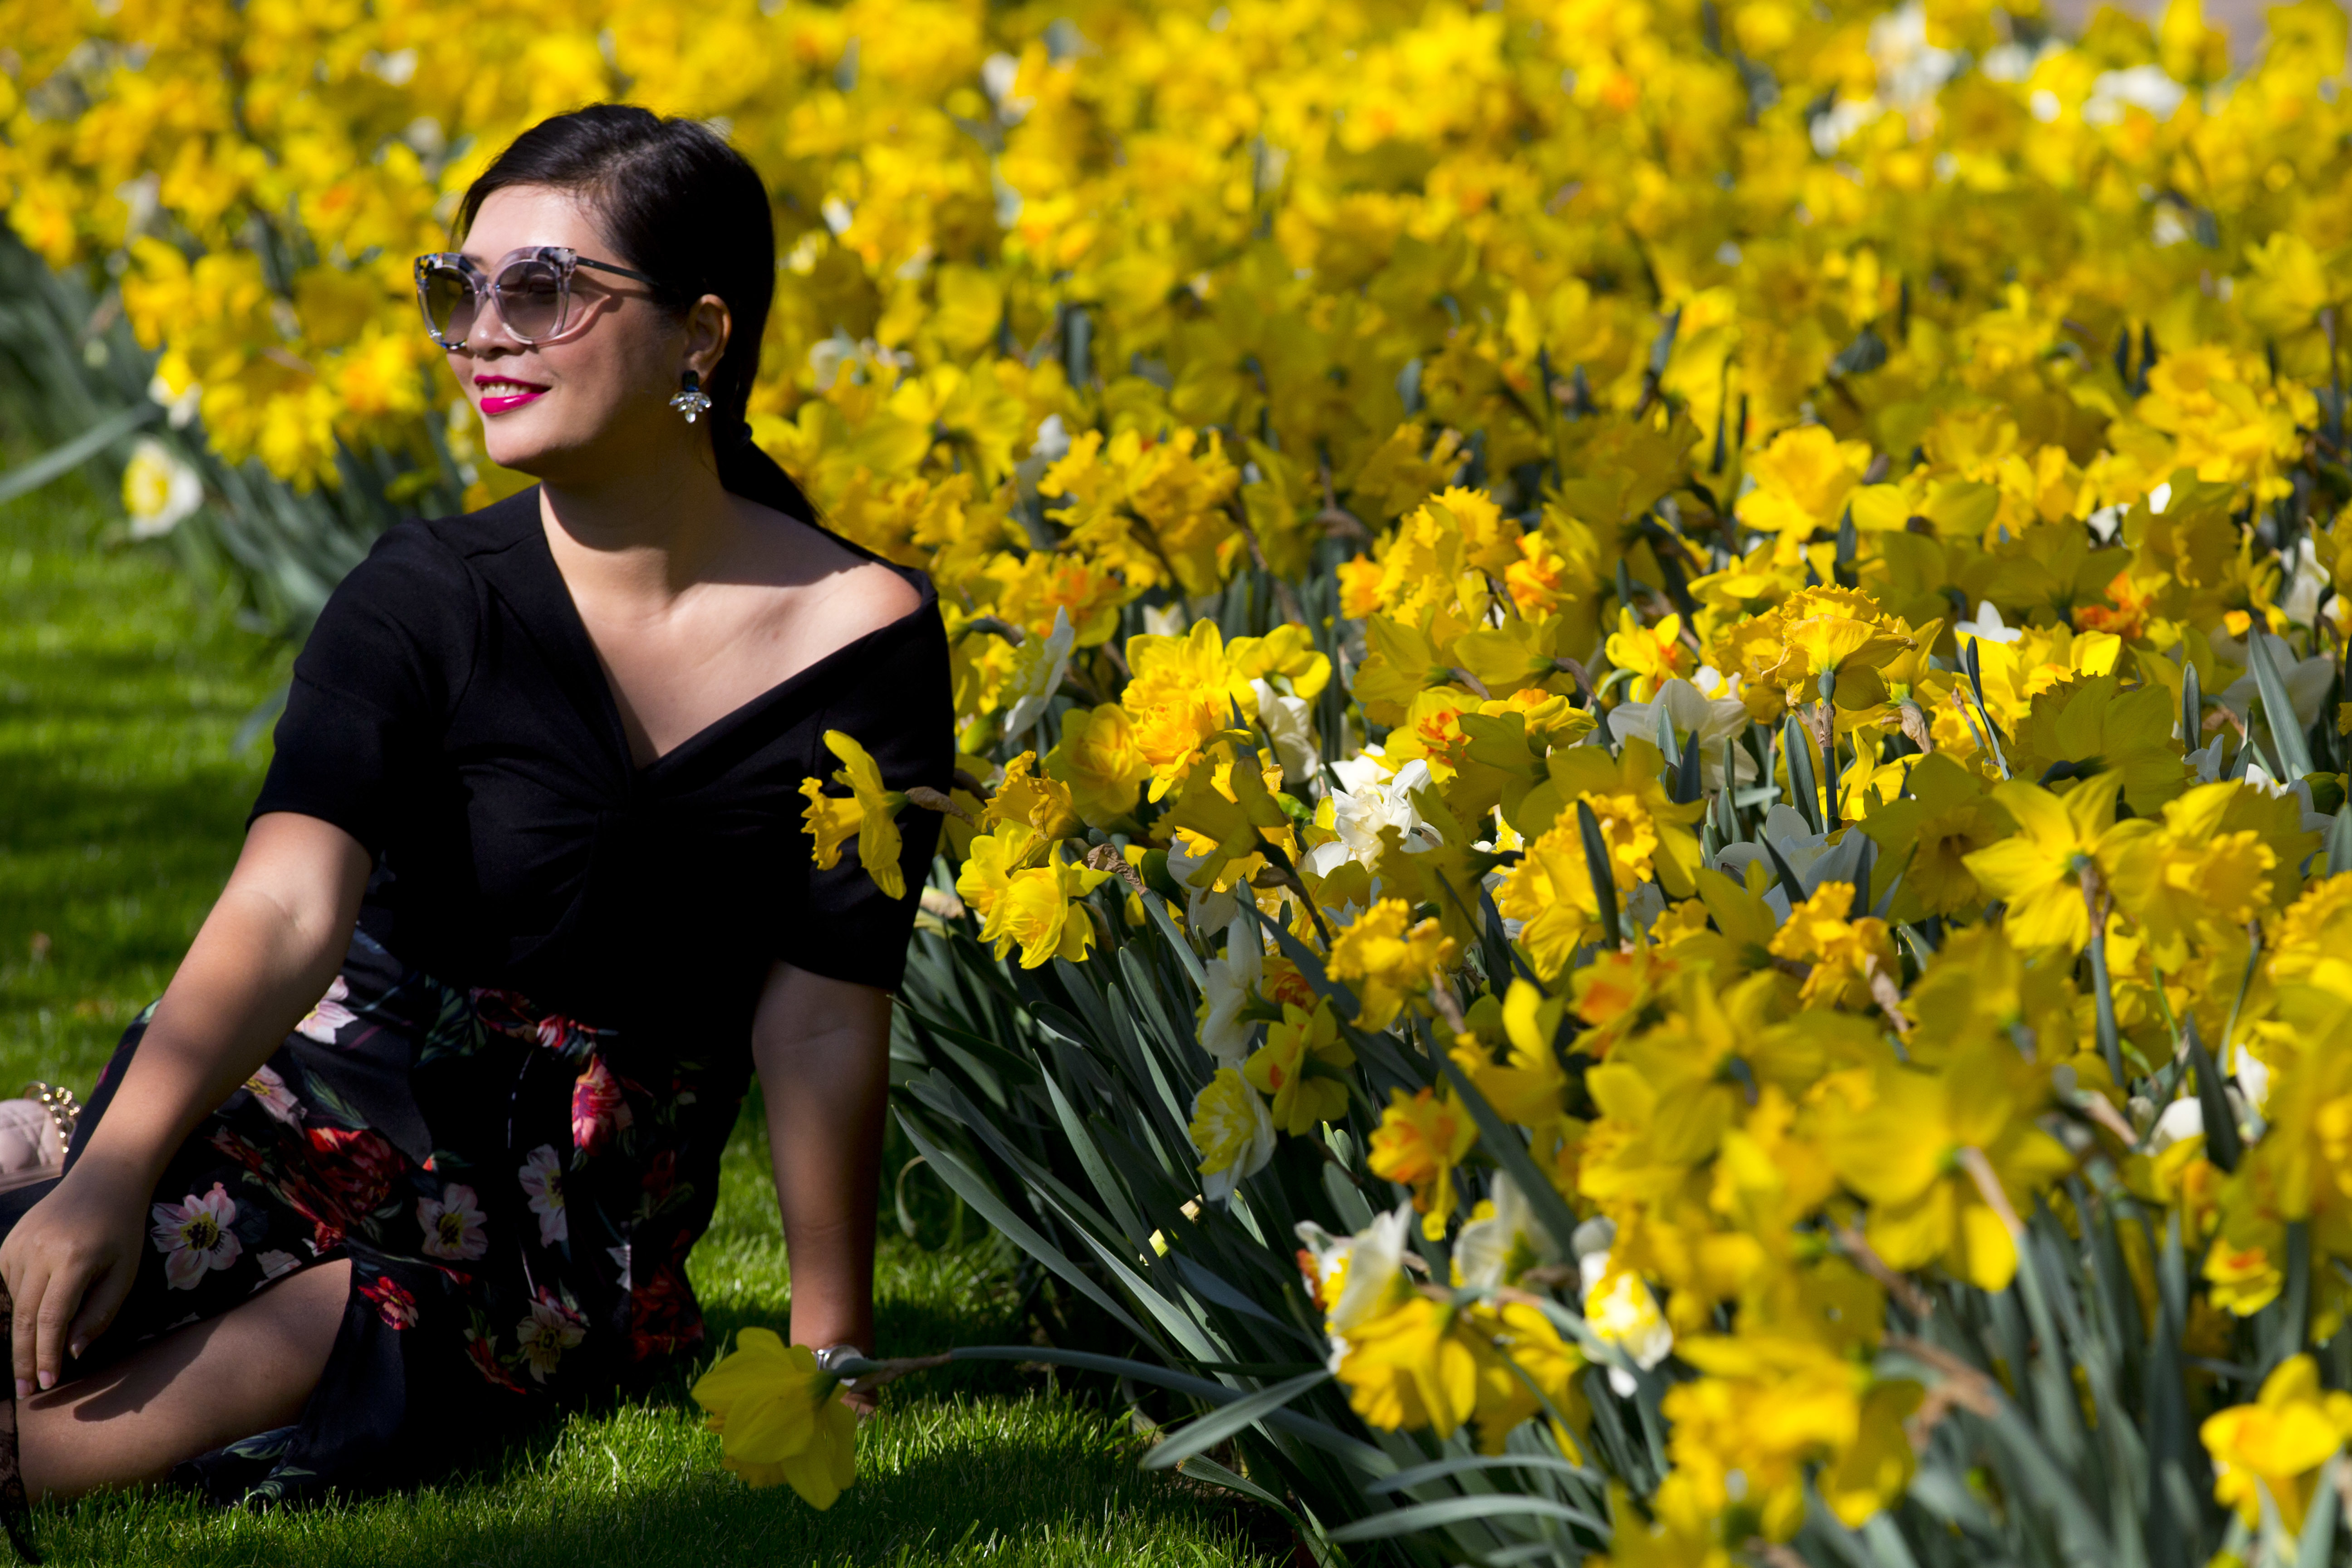 A tourists poses for a picture when visiting the Keukenhof spring garden in Lisse, west central Netherlands, Friday, April 20, 2018. De Keukenhof, open till May 13th, is a 32-hectares (80 acres) floral exhibition ground filled with seven million tulips, daffodils and hyacinths which attracts around 1 million tourists from all over the world. (AP Photo/Peter Dejong)